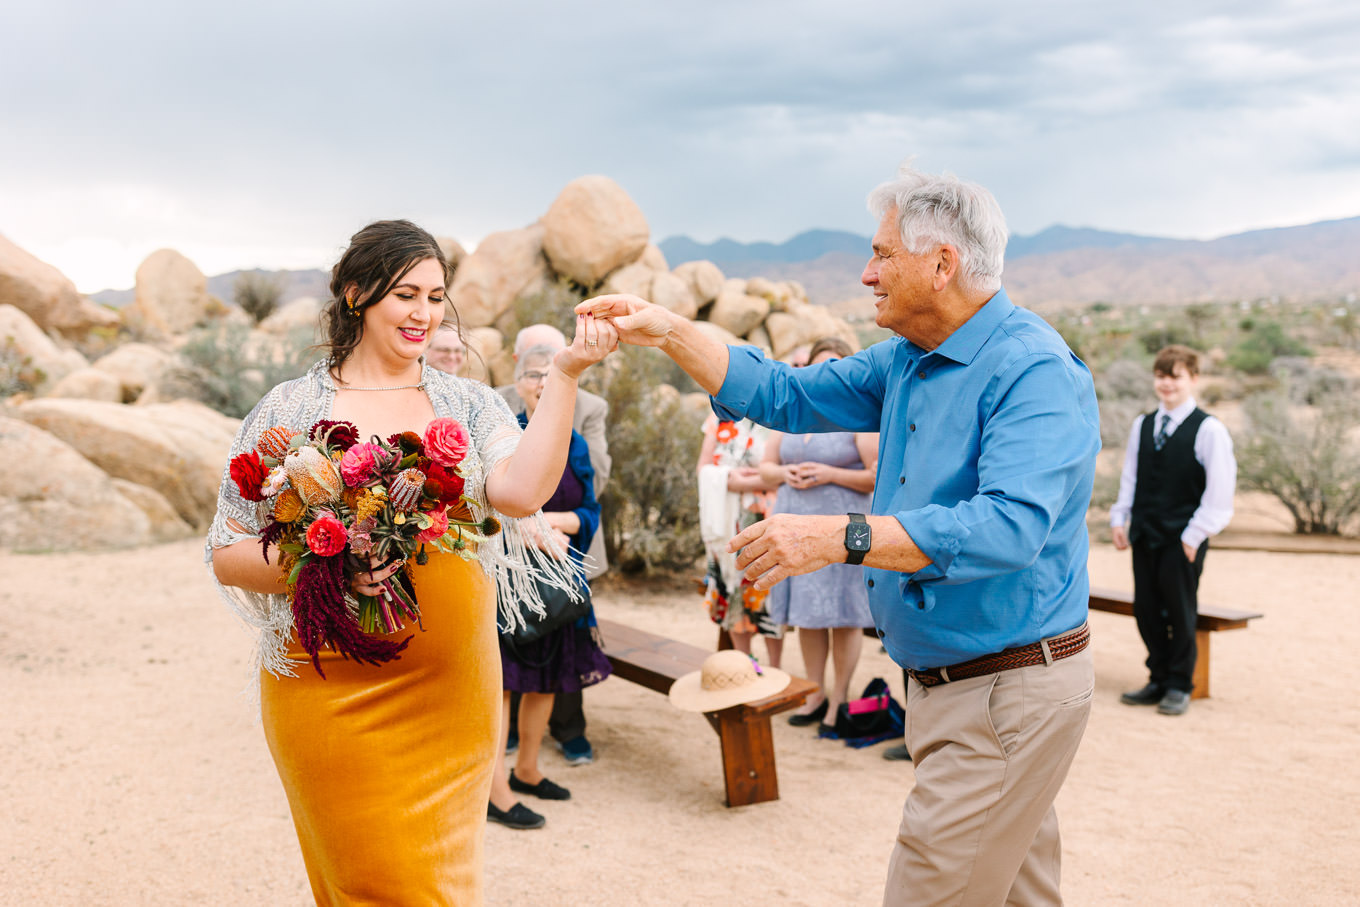 Joshua Tree wedding at The Ruin Venue | Wedding and elopement photography roundup | Los Angeles and Palm Springs  photographer | #losangeleswedding #palmspringswedding #elopementphotographer

Source: Mary Costa Photography | Los Angeles